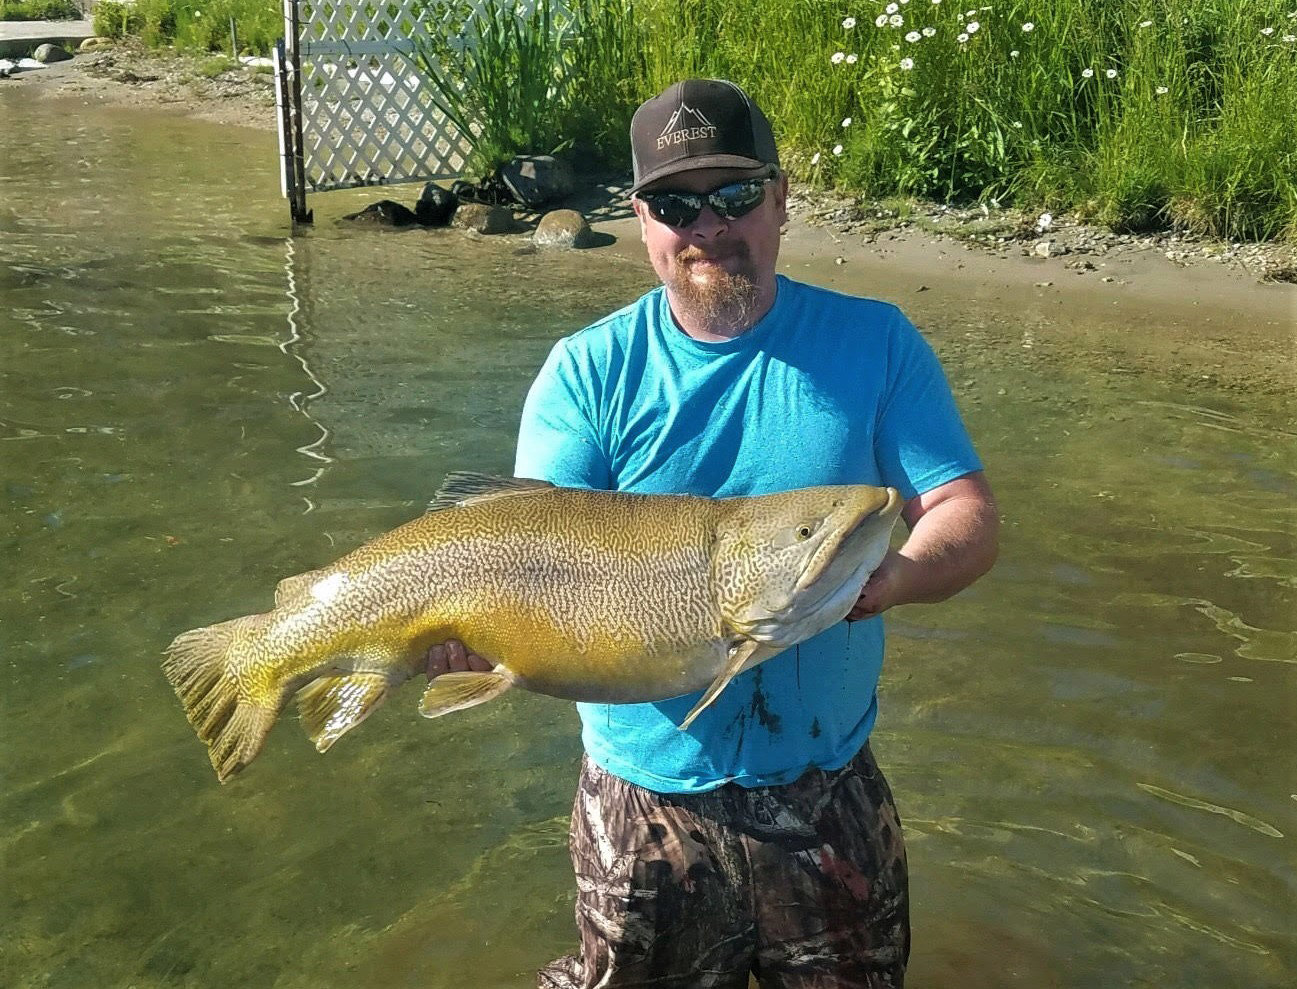 Caylun Peterson with his state record 24.49-pound tiger trout in Loon Lake on June 26, 2021.